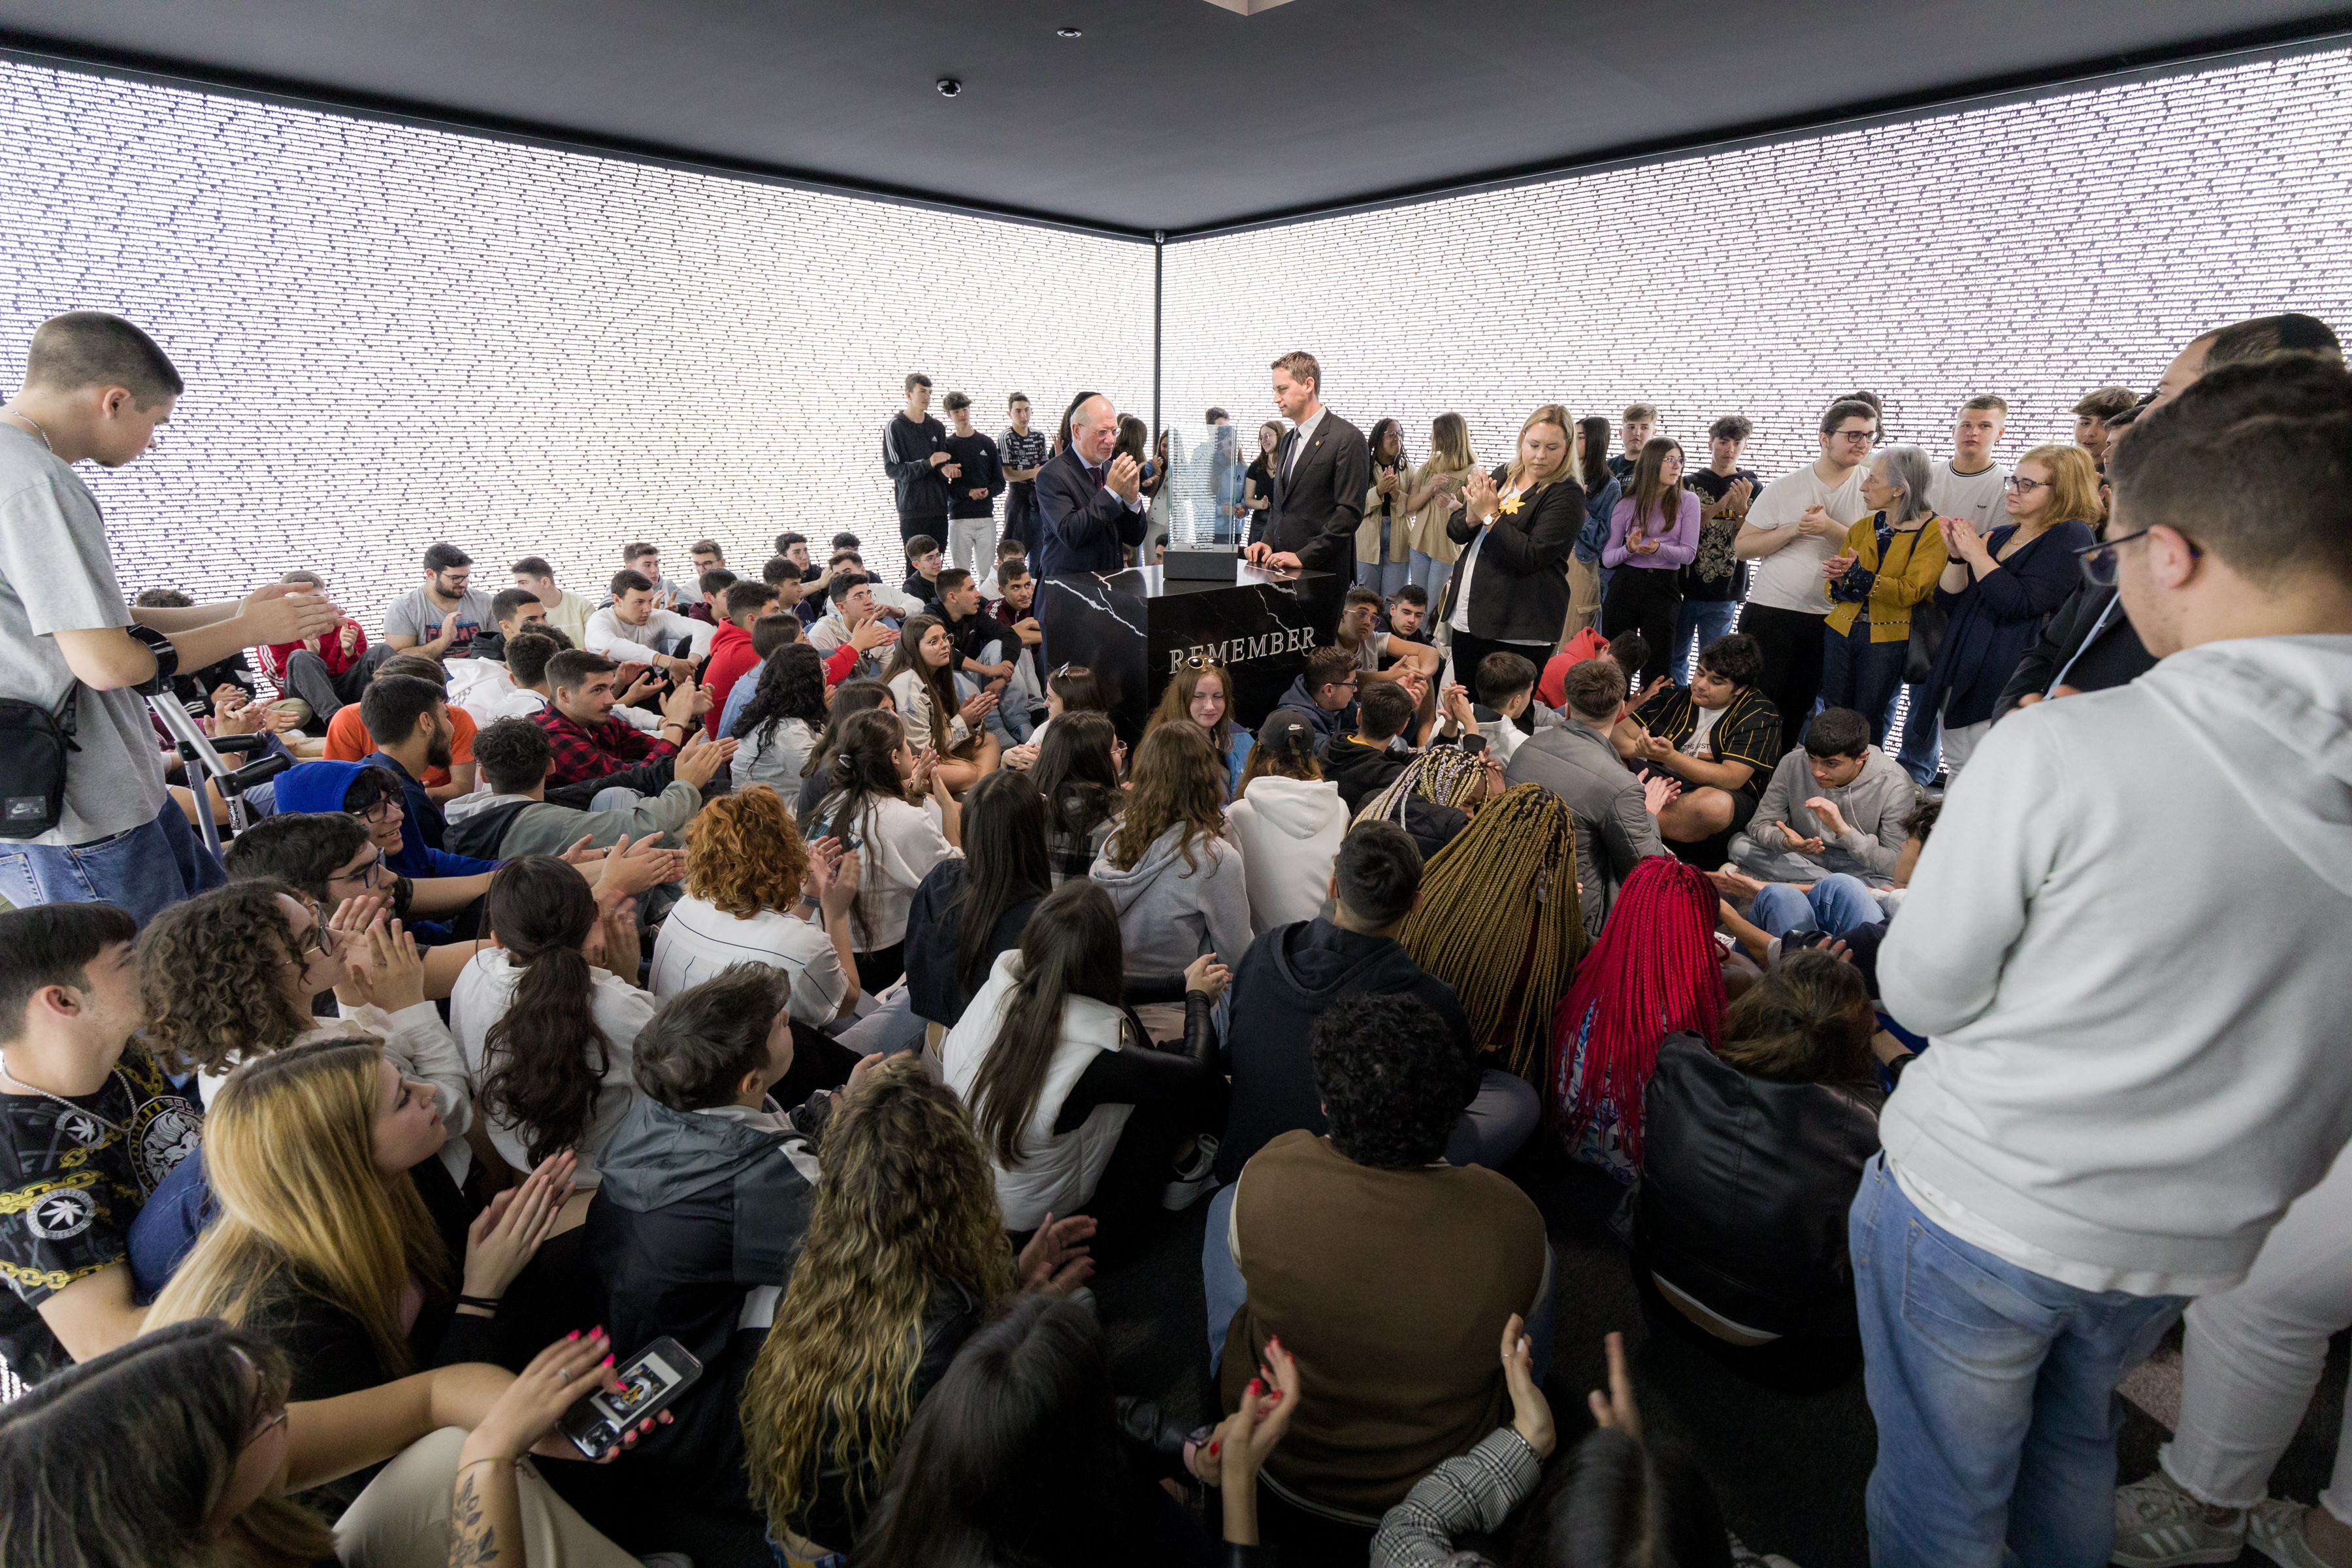 The only Holocaust museum in Iberia opened its doors to 1000 teenagers on the eve of Yom HaShoah